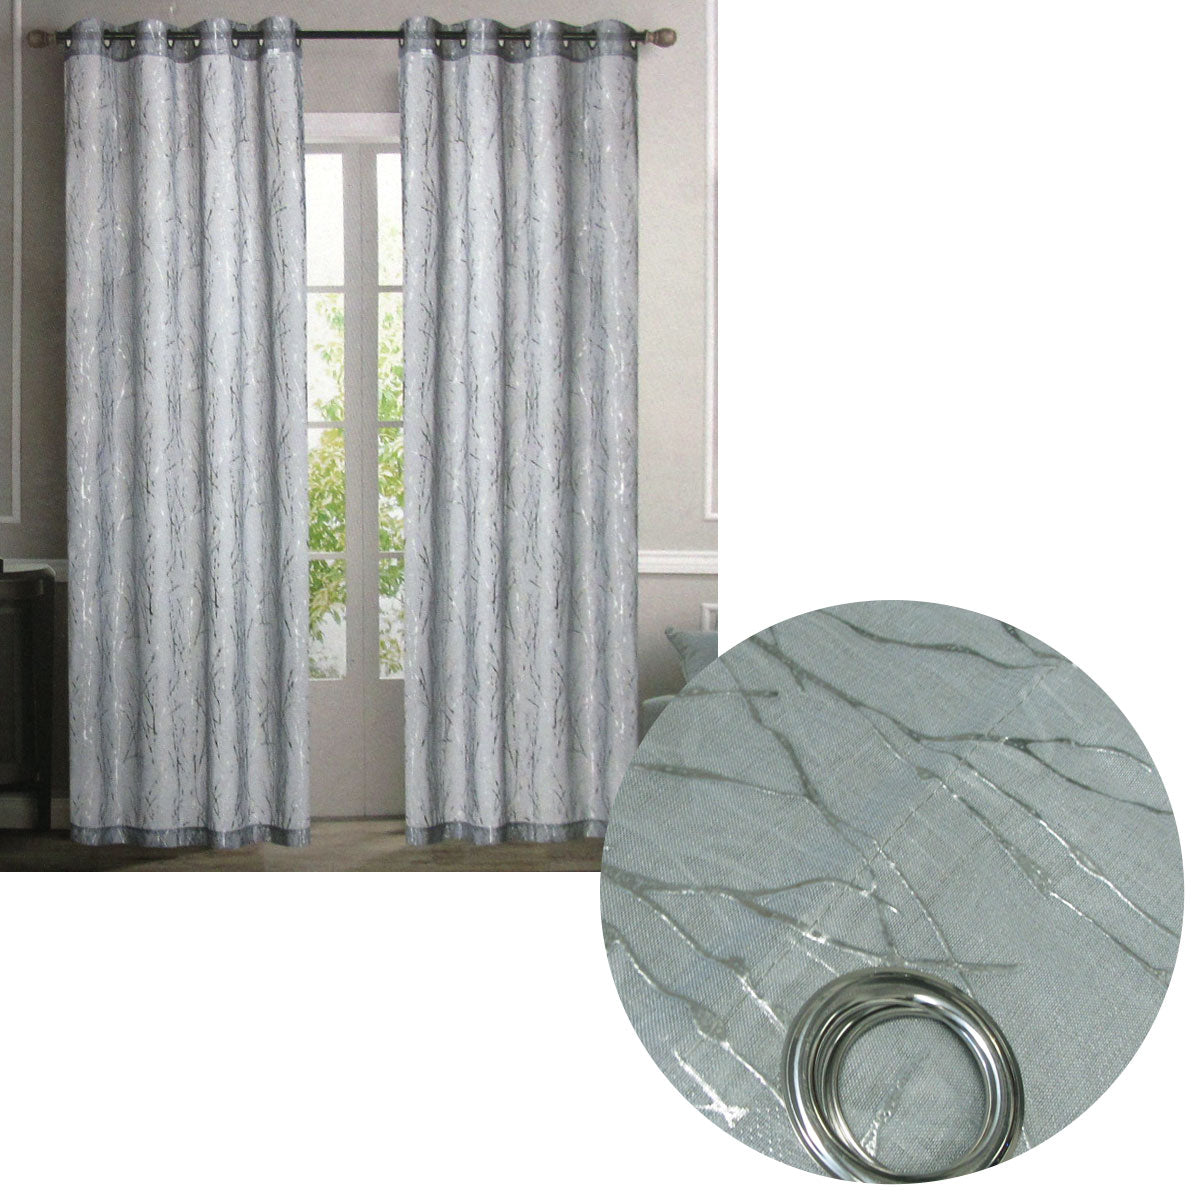 Pair of Sheer Eyelet Curtains Grey with Silver Foils 137 x 213 cm